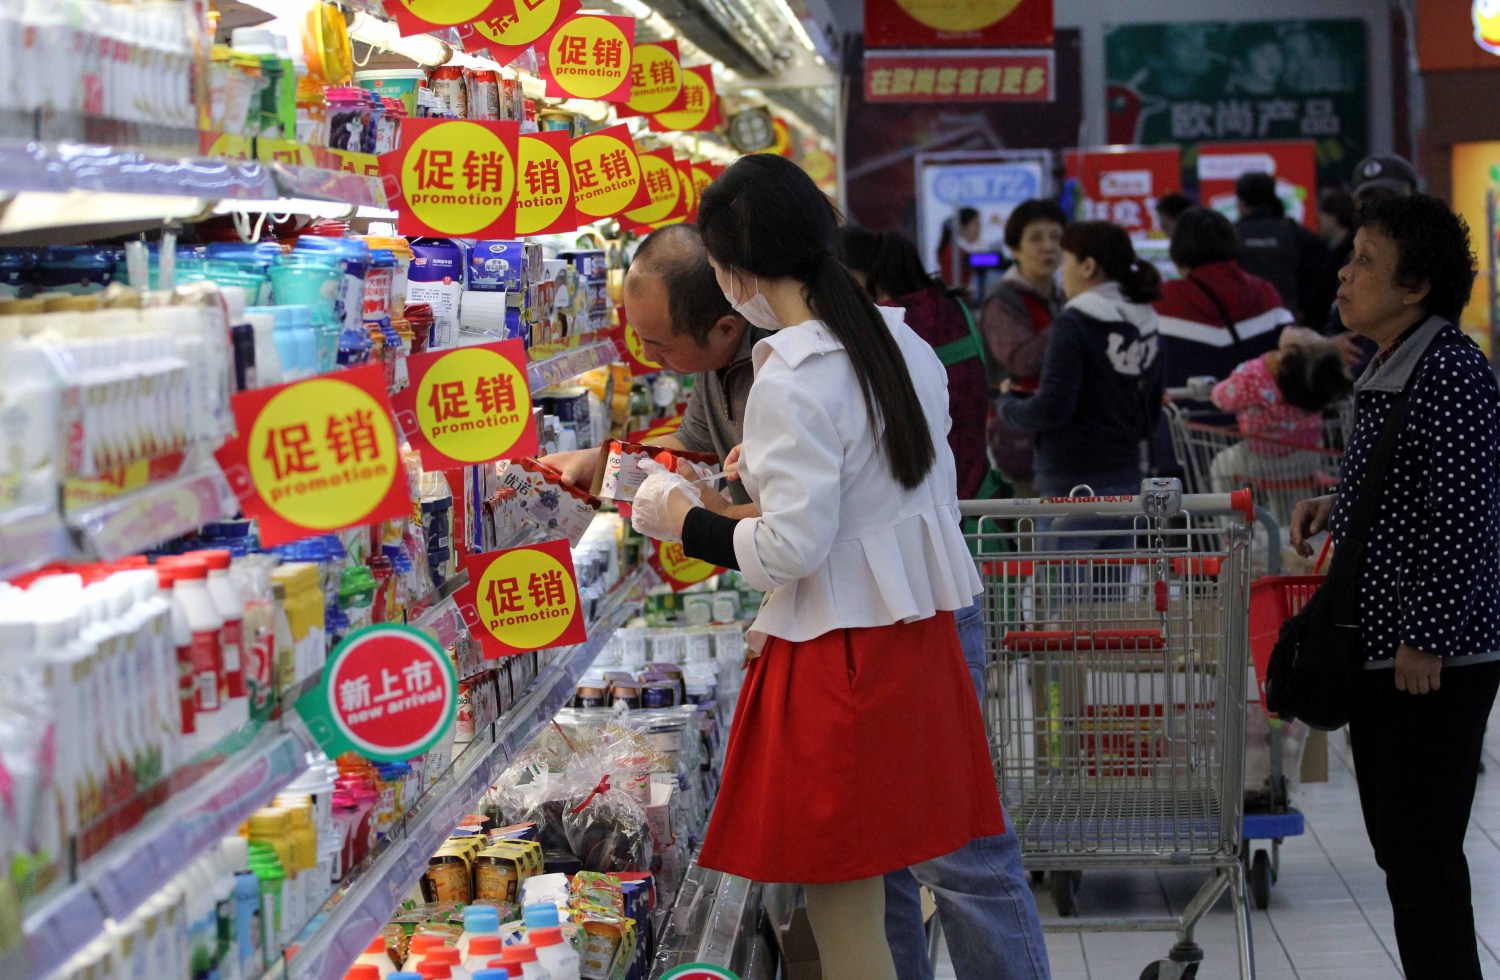 --FILE--Customers shop for dairy products due to discounts at a supermarket in Nanjing city, east China's Jiangsu province, 16 October 2017.Consumers who are anticipating cheaper prices for products during the upcoming Nov 11 shopping festival may not necessarily find them online, a new study said. According to the 2017 China shopping report jointly released by market consultancies Bain & Co and Kantar Worldpanel, the online prices of many product categories are higher than those offered in physical stores, with the biggest price differences seen for toothbrushes, hair conditioners and kitchen cleansing supplies. Jason Yu, general manager of Kantar Worldpanel for Greater China, said the price differences can be largely attributed to the fact that relatively more high-end products are purchased online. "While Chinese consumers used to shop online for low prices in the past, it has been increasingly noticeable in the recent five years that people prefer products that indicate a better lifestyle or entail more added value," he said. As a result, the sales of imported goods, especially food products and personal care products, have risen significantly, he said. "To cater to this trend, leading e-commerce players such as Alibaba and JD.com have upgraded their offerings on their platforms to meet the demand of the rising middle class and younger consumers," he said.No Use China. No Use France.